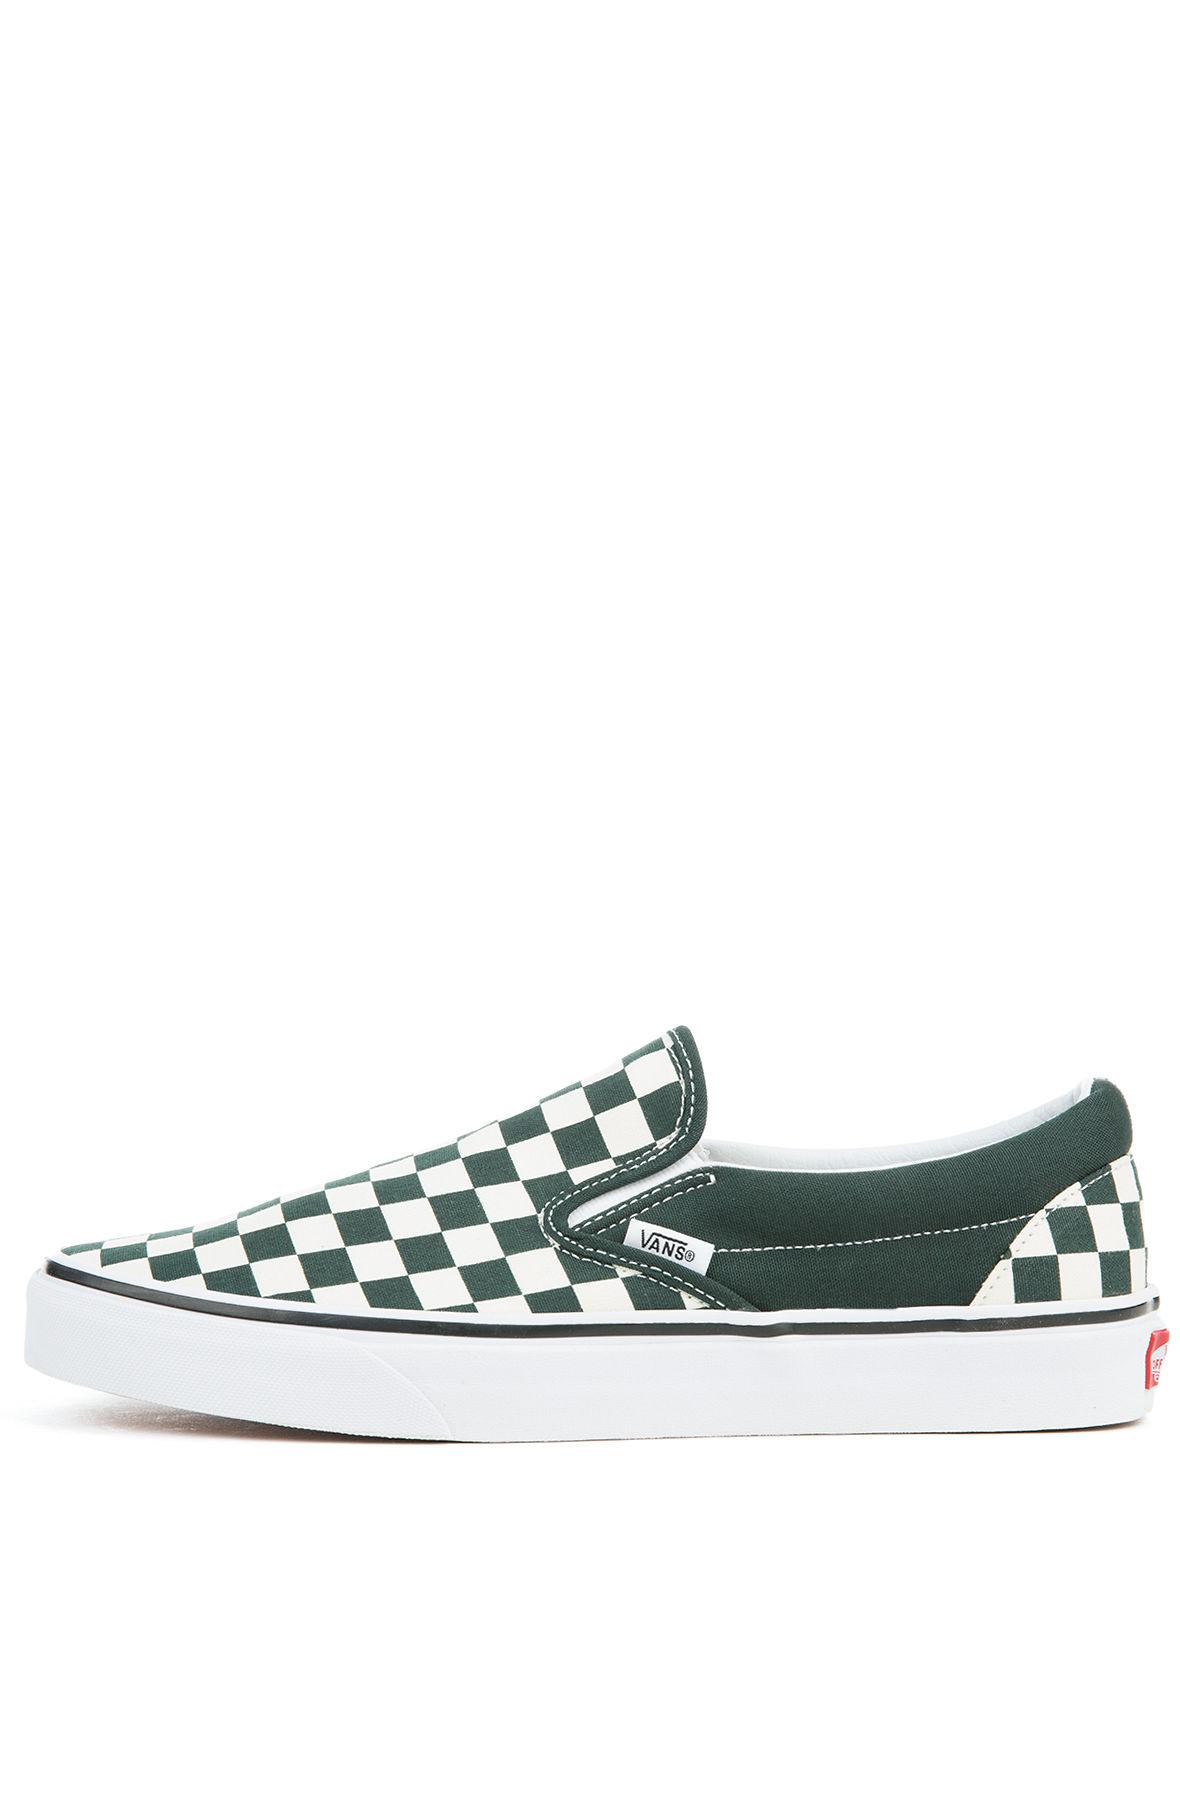 green and white checkerboard slip on vans